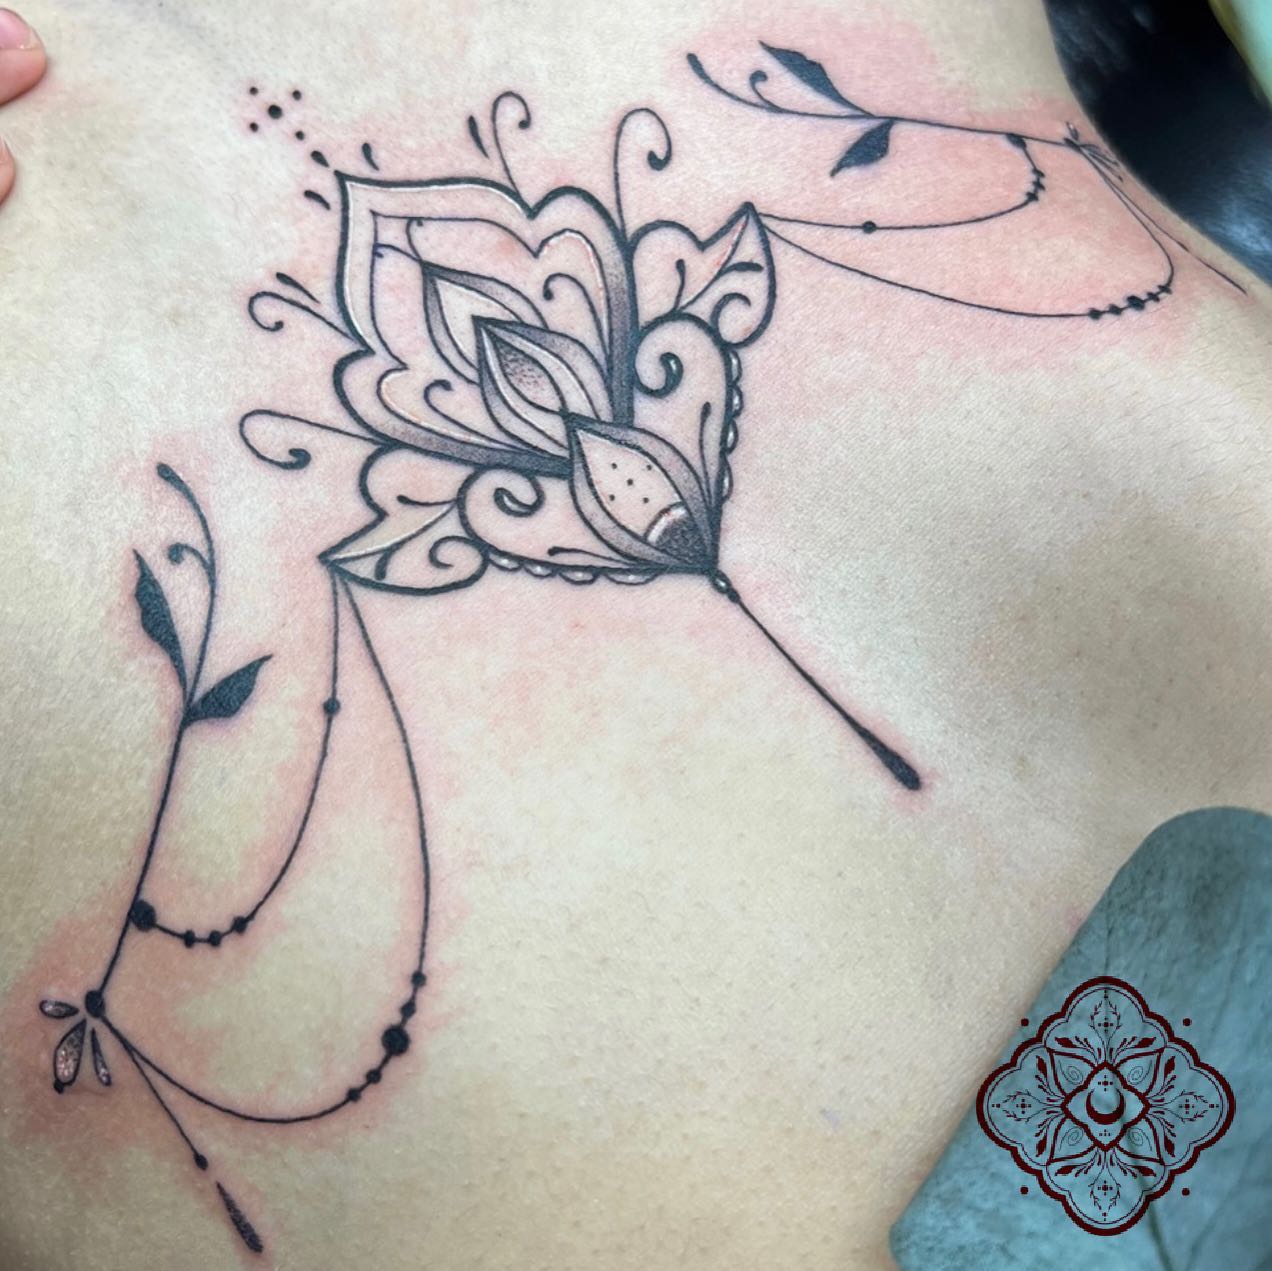 Loved doing this one! Underboob flower ornament 🪷🤍 

Done at studioxiiigallery 
•
•
•
•
•
•
•
•
•
•
•
•

    
    
     